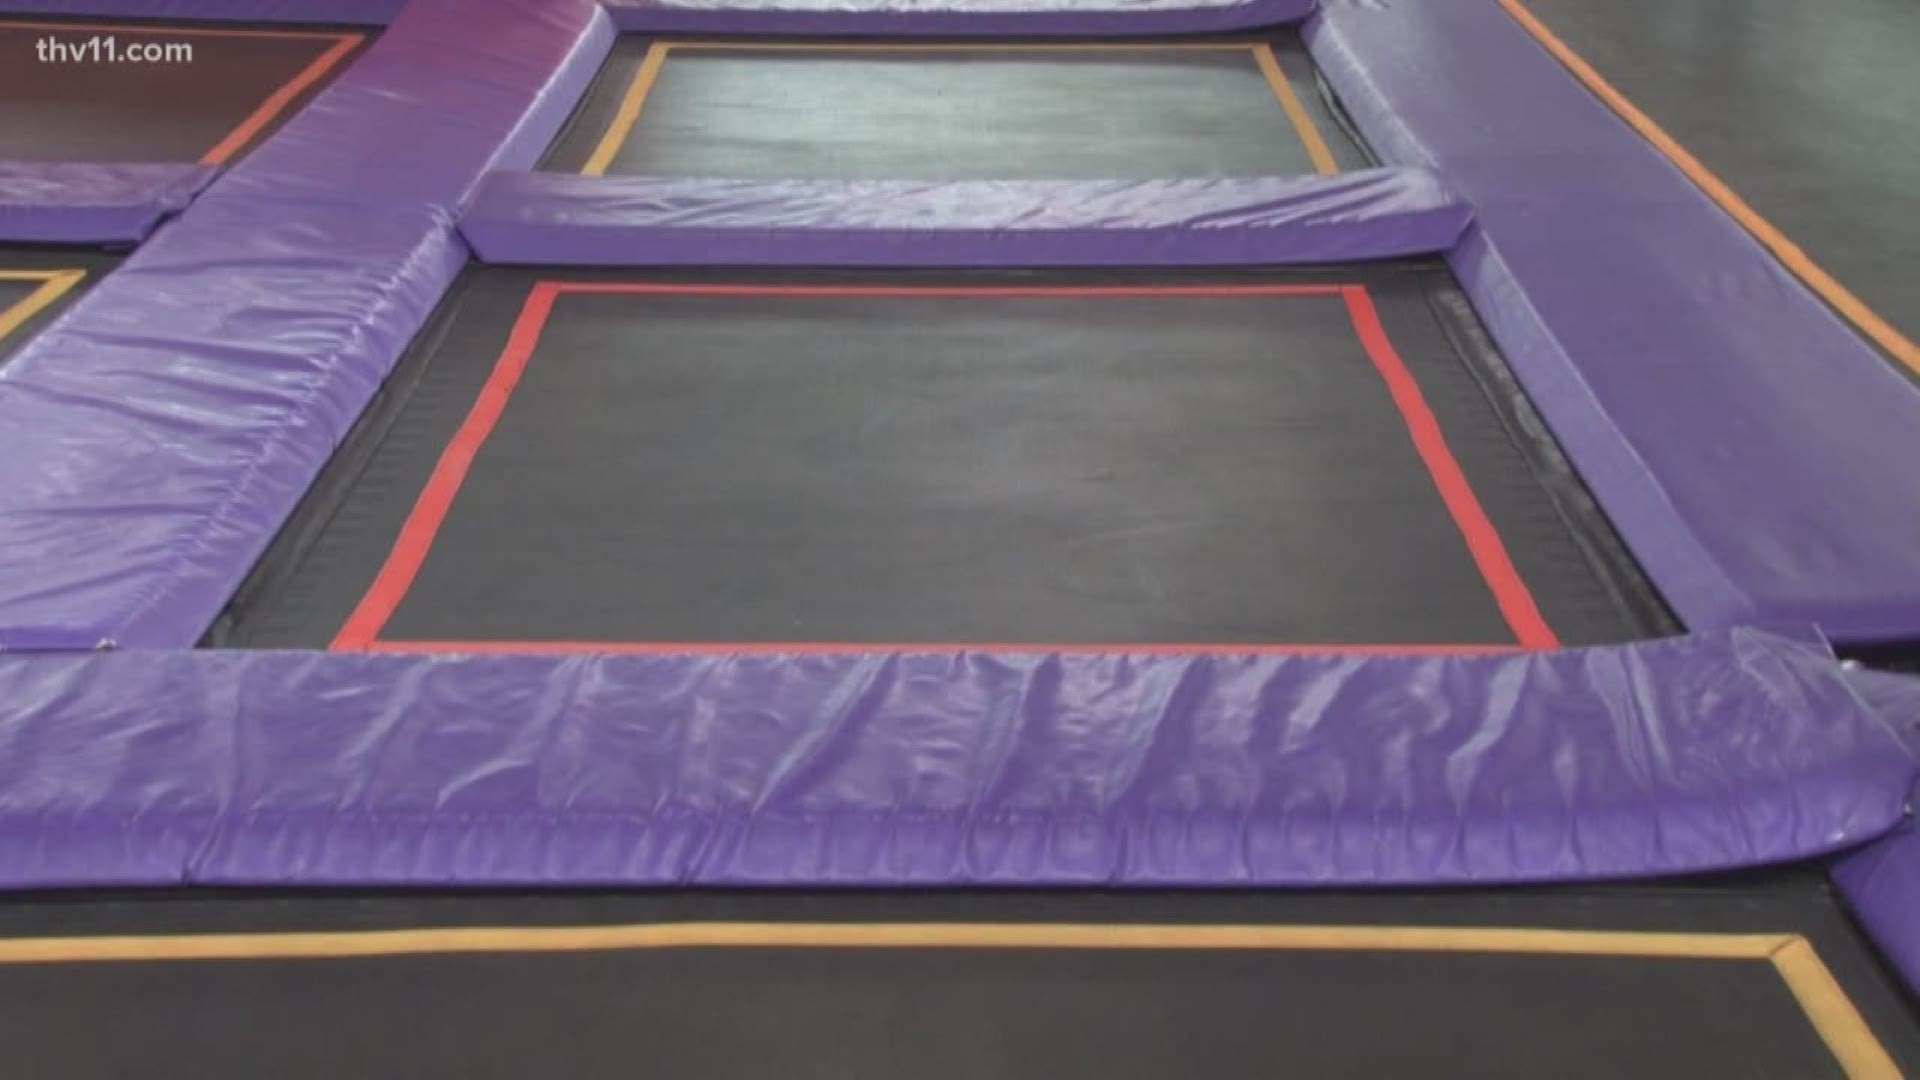 As the popularity and number of trampoline parks have grown in recent years, so has the number of injuries from them.